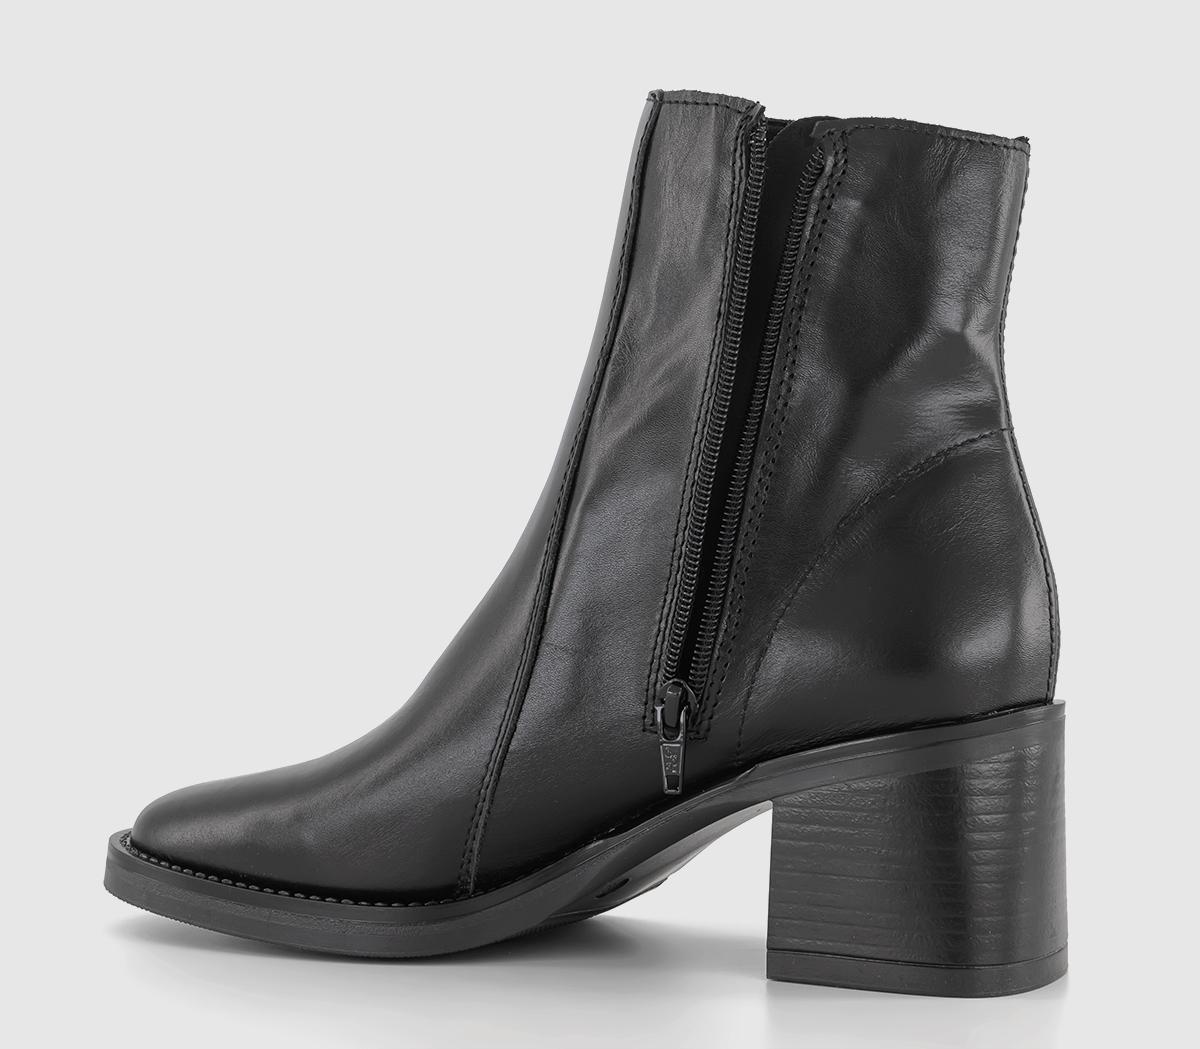 OFFICE Annabella Square Toe Leather Block Heel Boots Black Leather ...